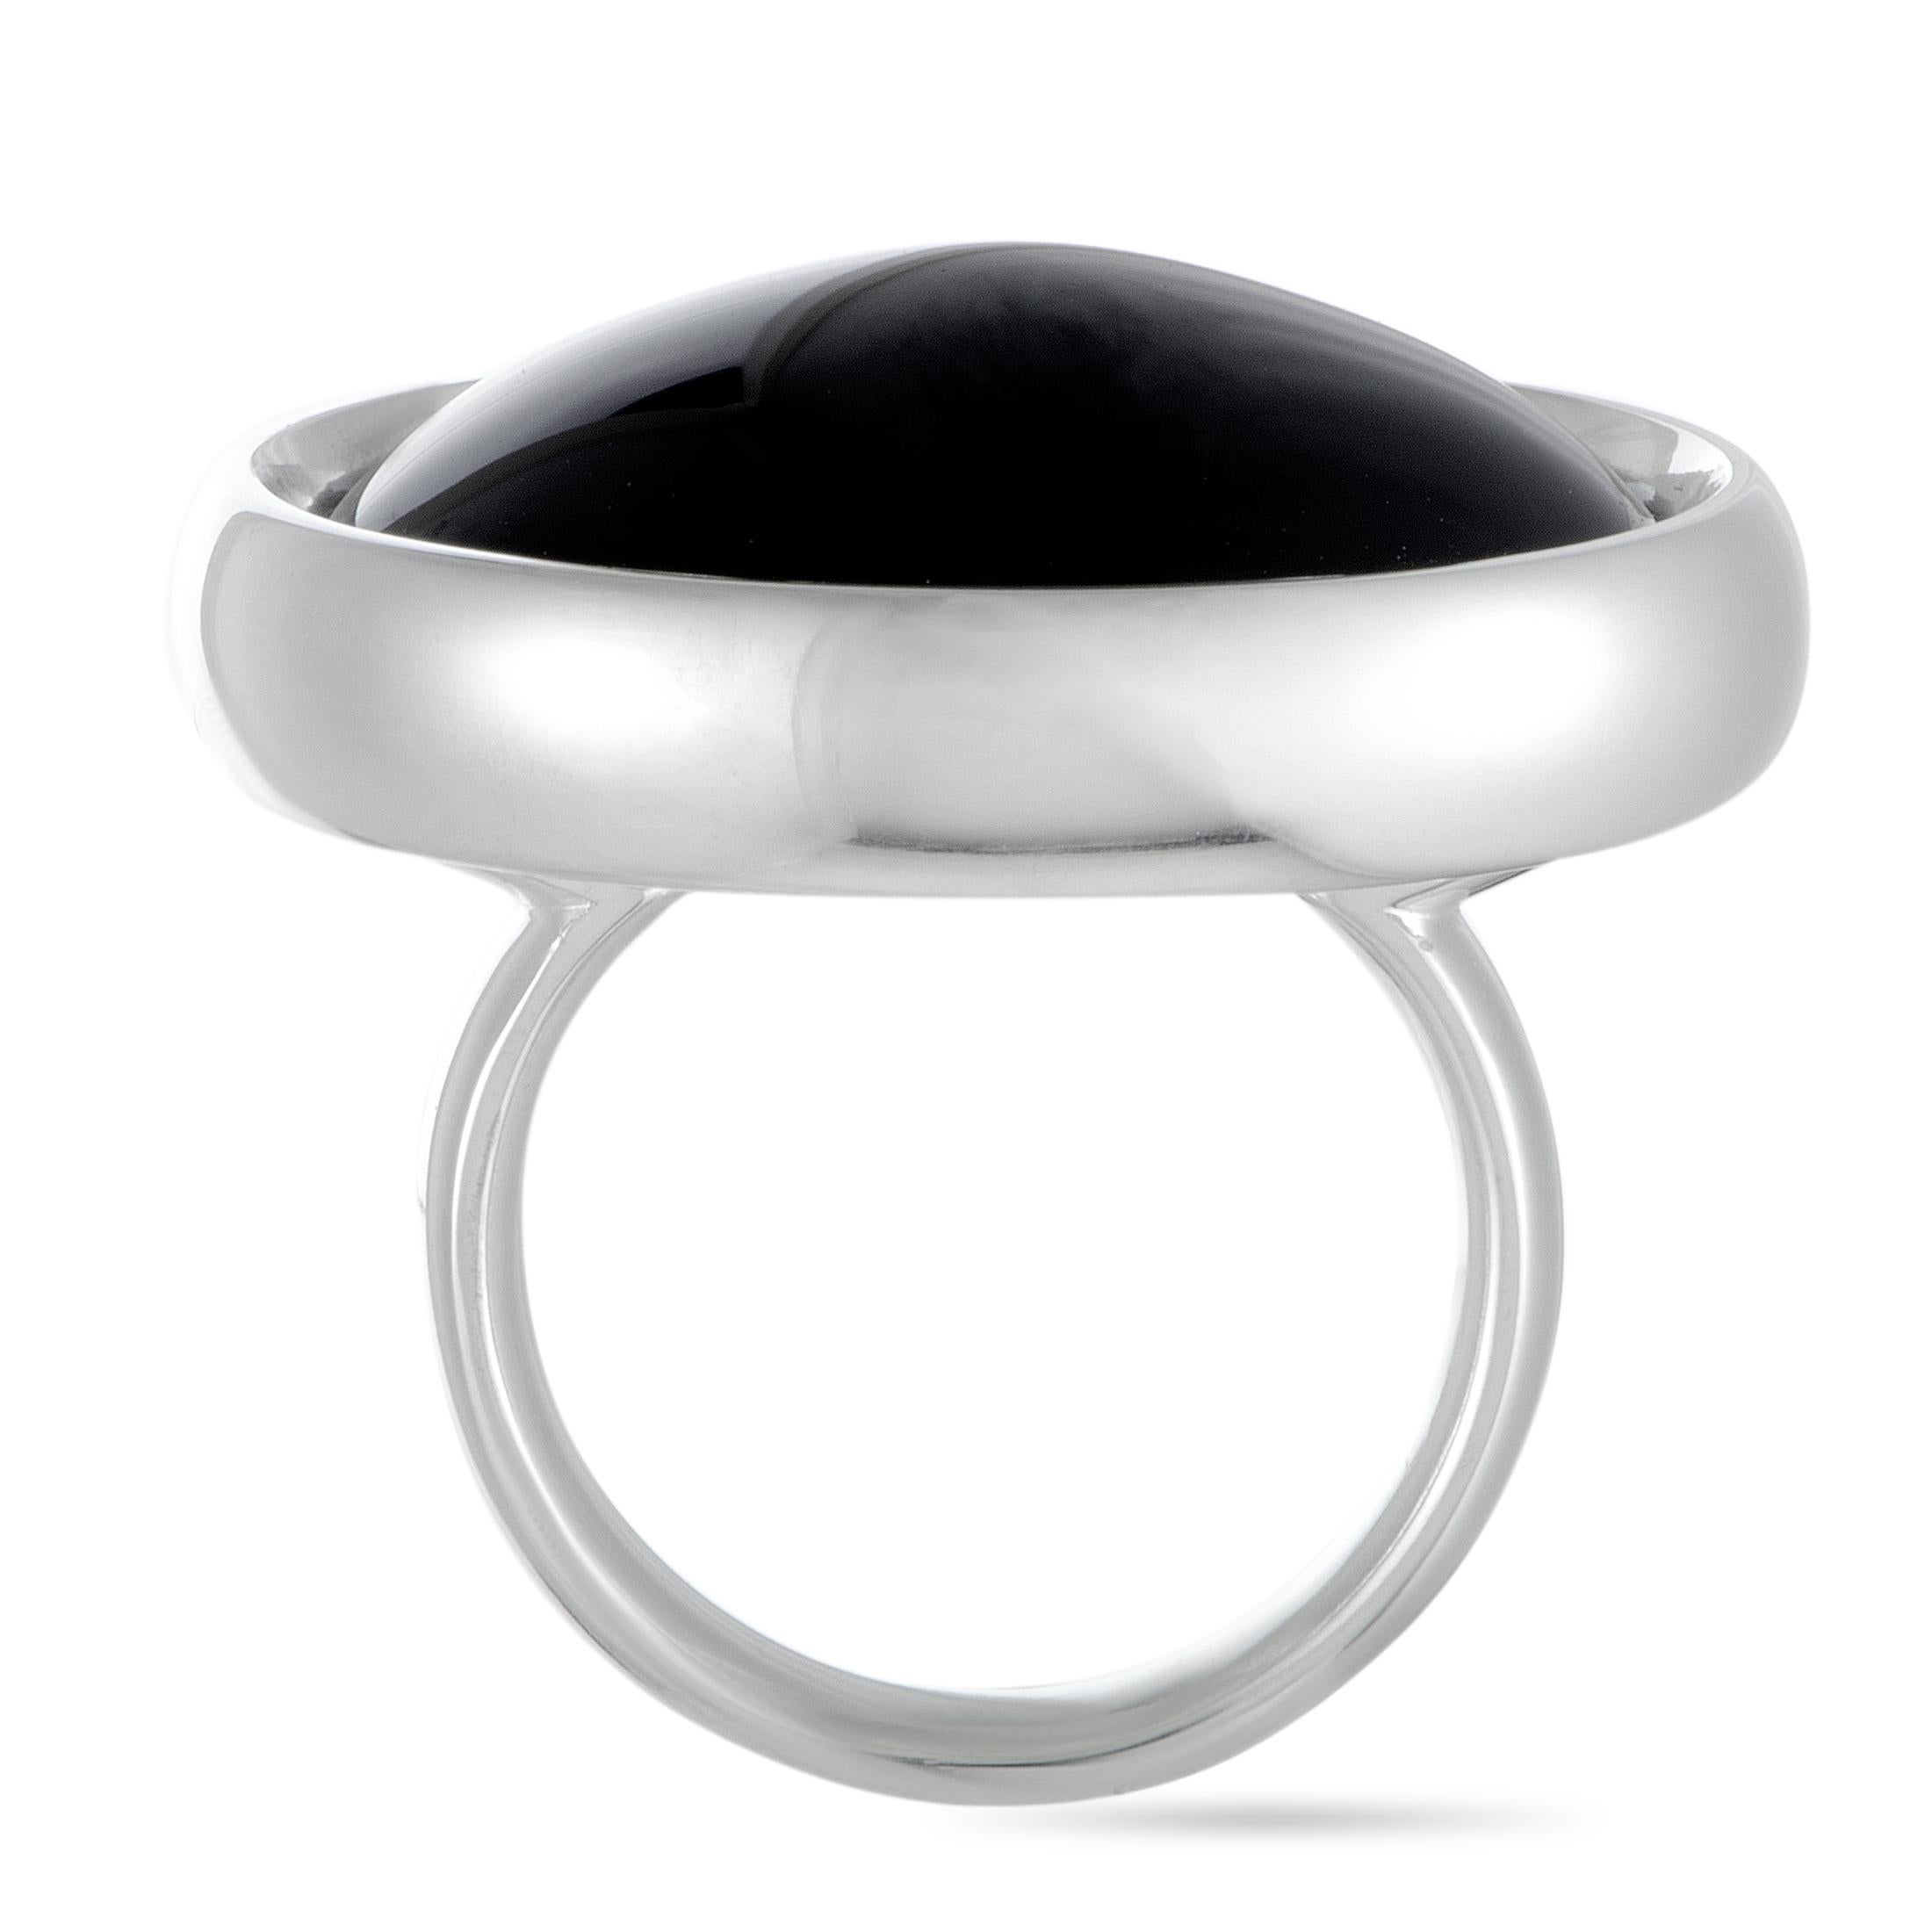 The Georg Jensen “Regitze” ring is made of sterling silver and set with a black agate. The ring weighs 18.2 grams, boasting band thickness of 4 mm and top height of 8 mm, while top dimensions measure 25 by 25 mm.

Offered in brand new condition,